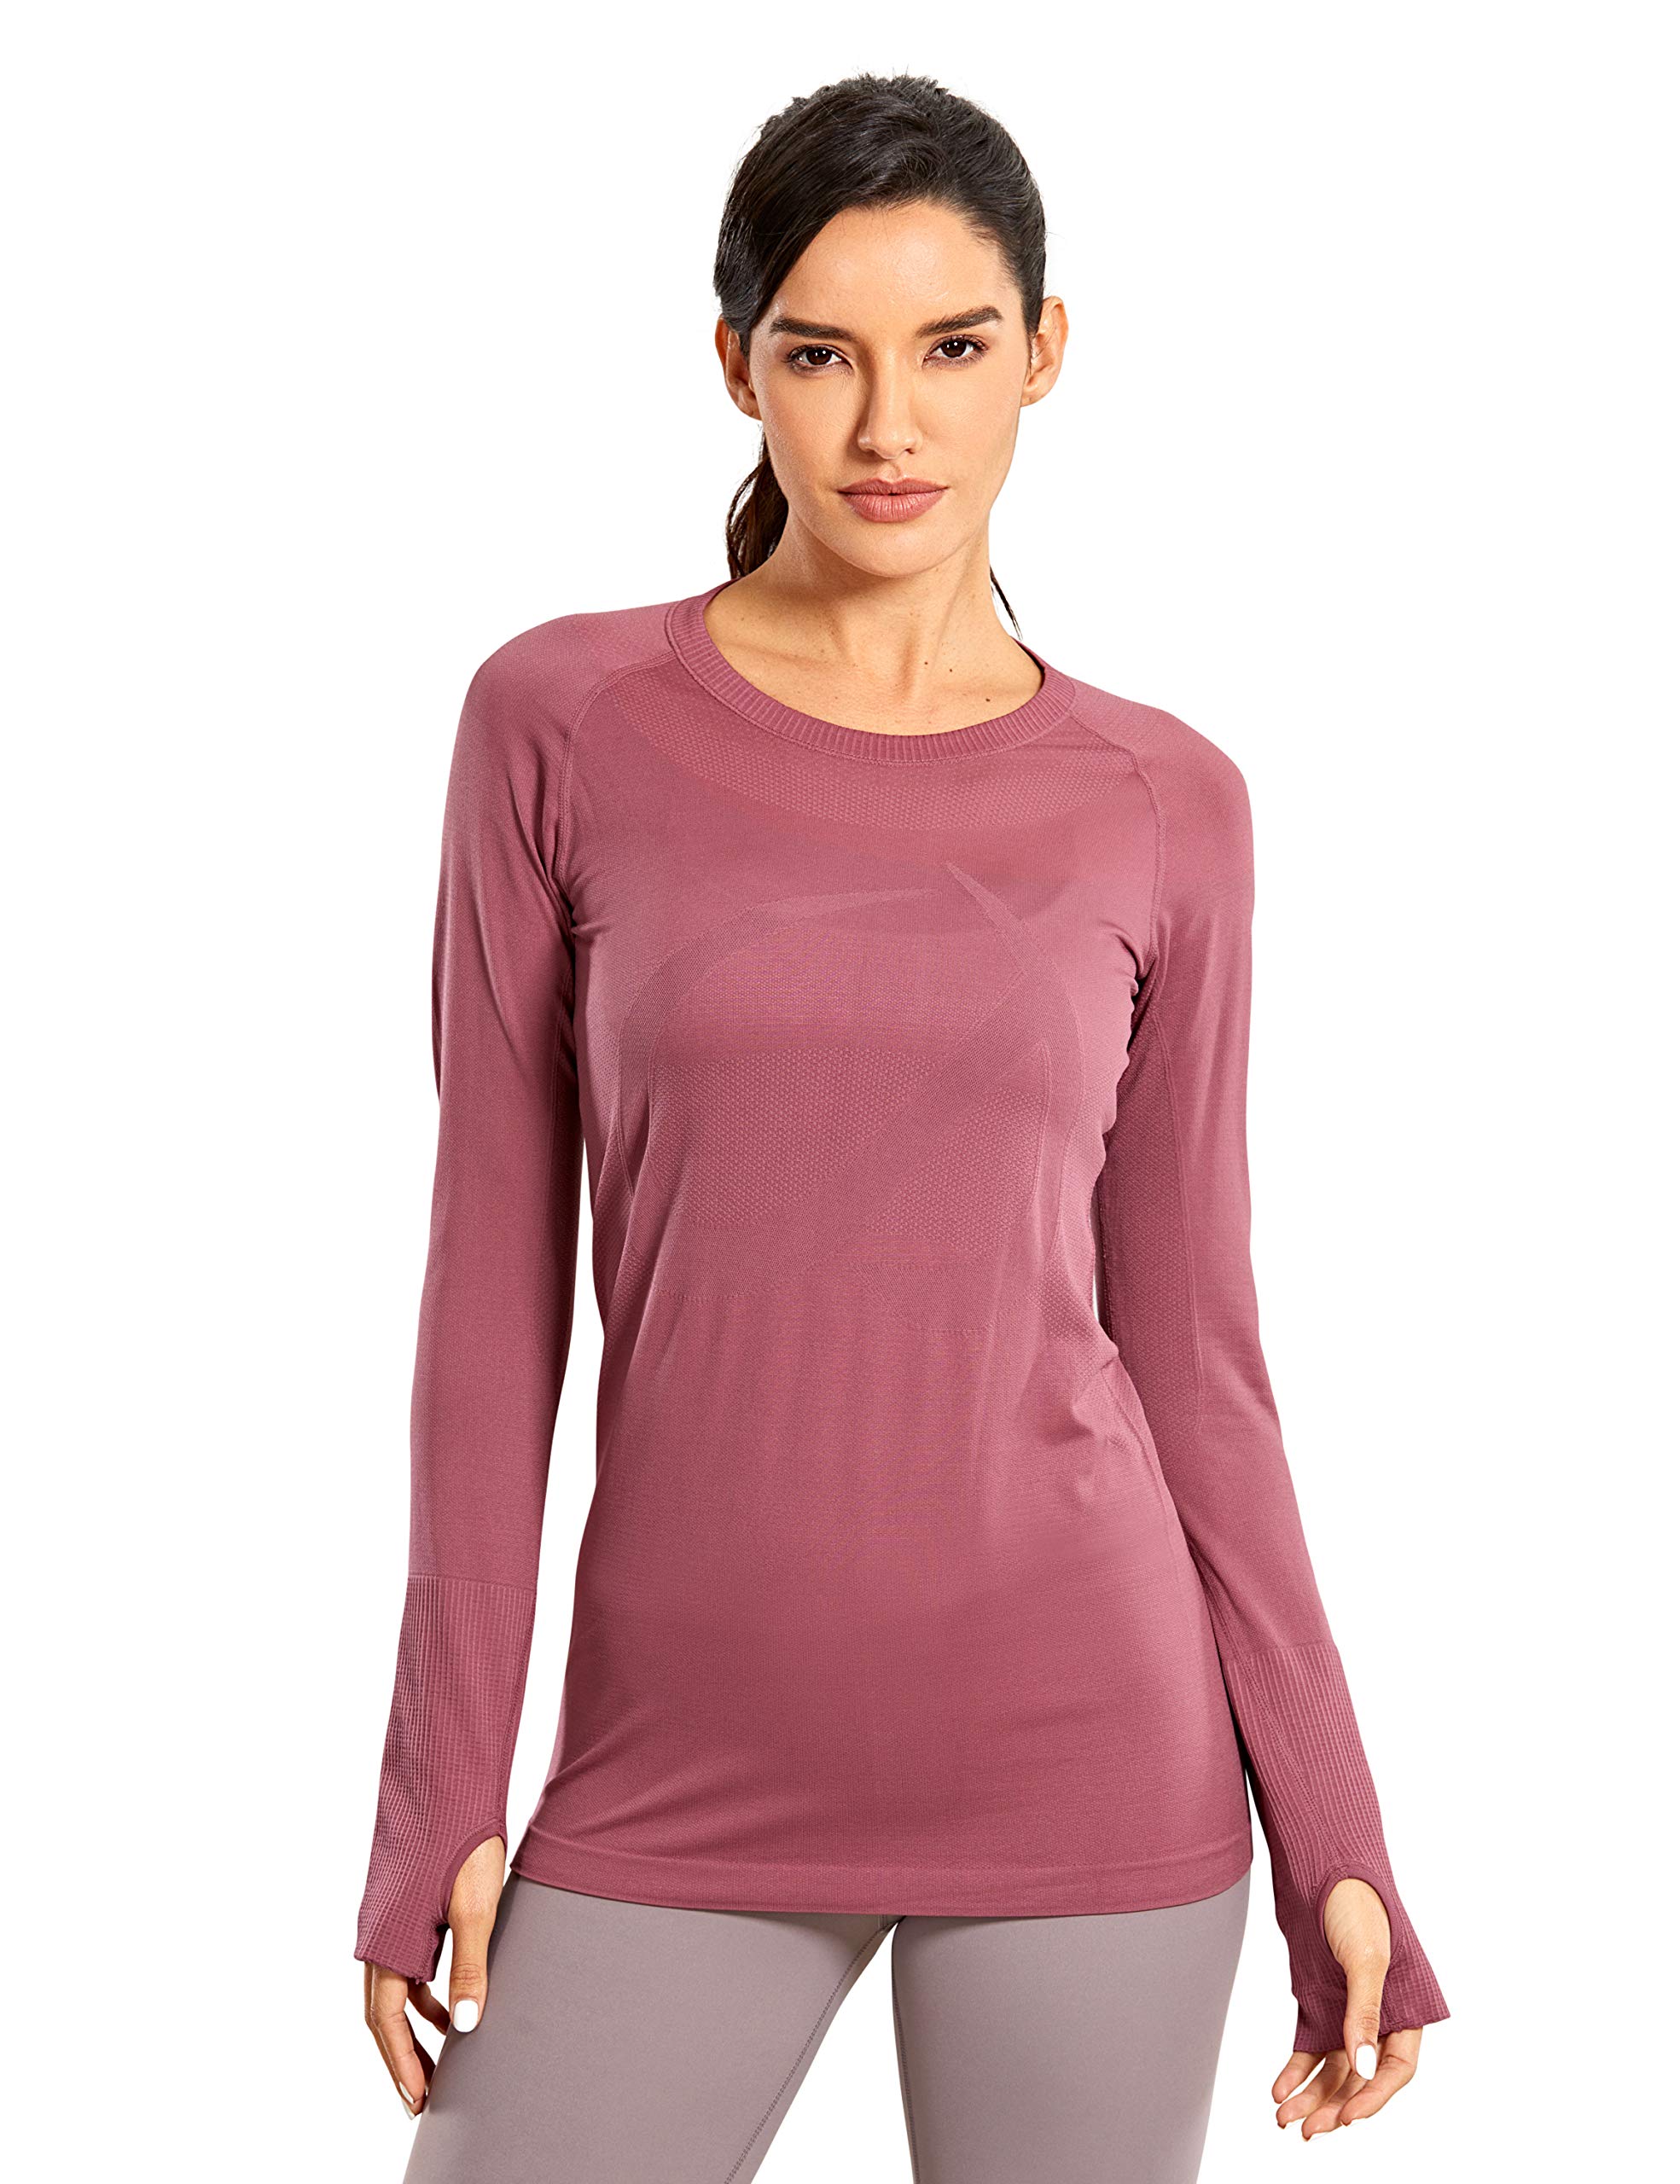 CRZ YOGA 1 cRZ YOgA Womens Seamless Athletic Long Sleeves Sports Running  Shirt Breathable gym Workout Top Misty Merlot-Slim Fit Small